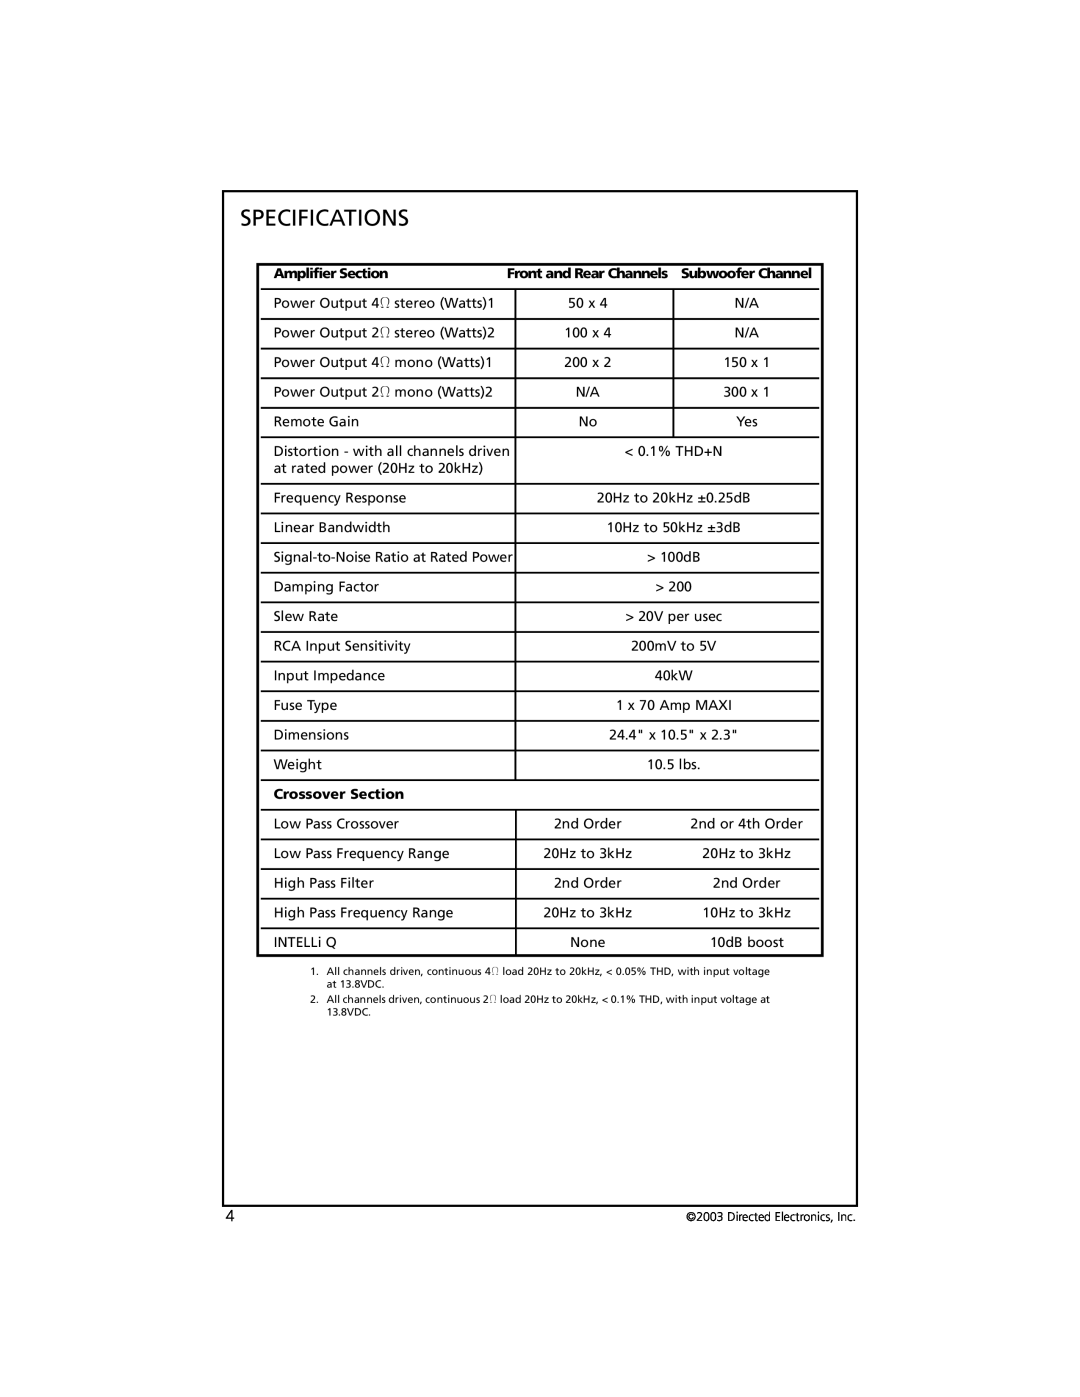 Orion Car Audio 7005 manual Specifications, Amplifier Section, Crossover Section 